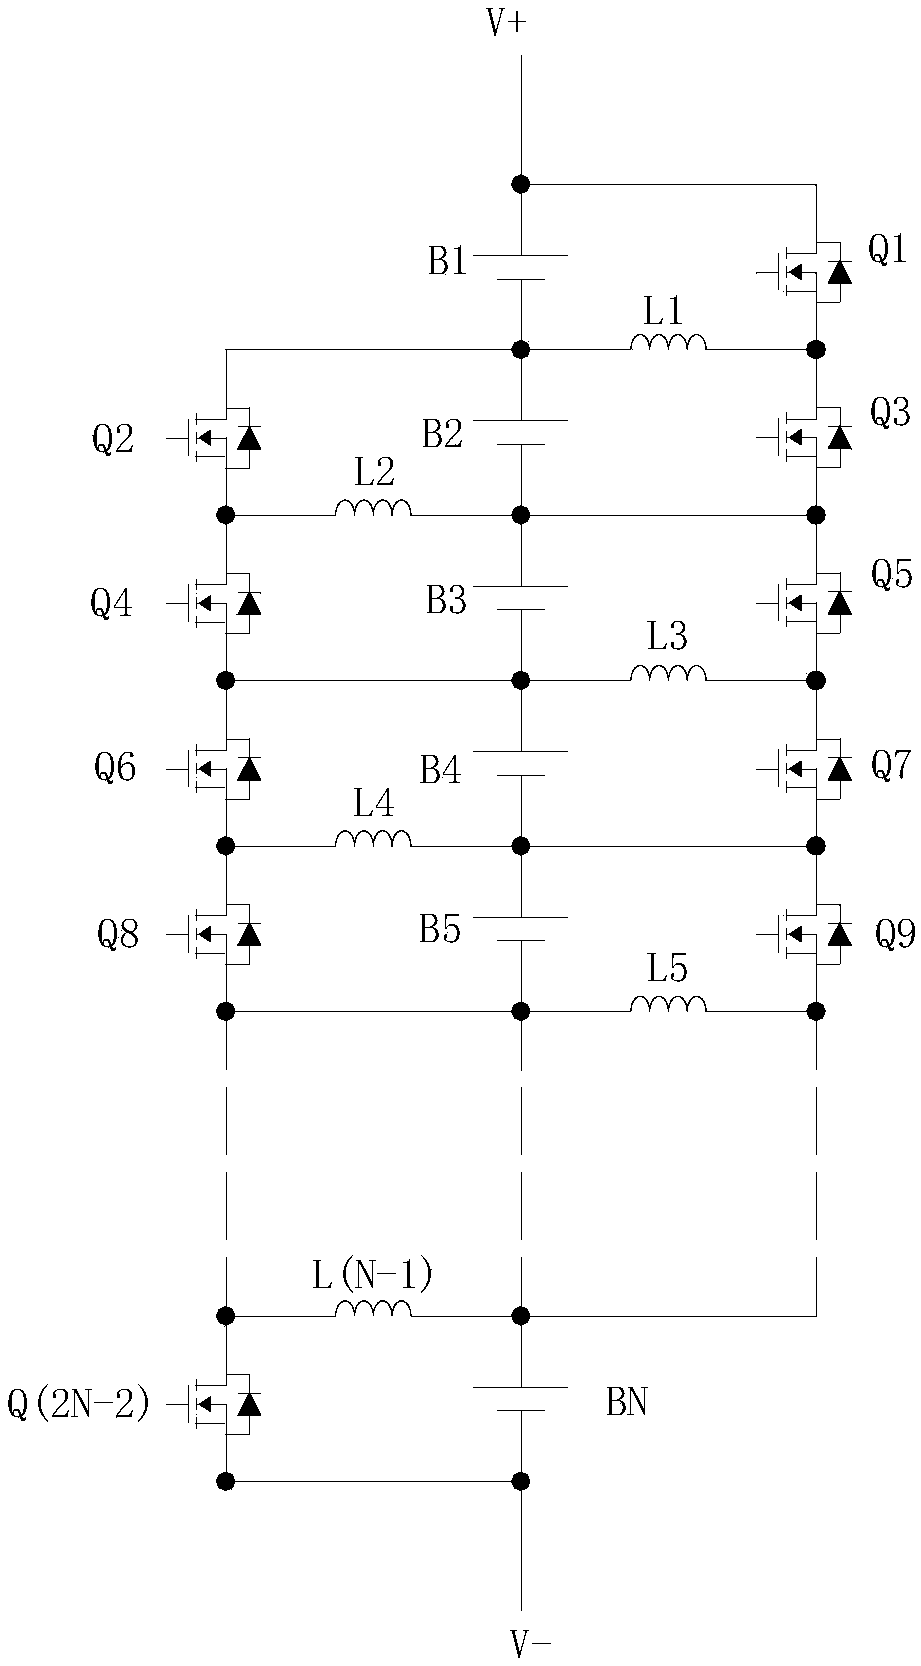 A system and method for modular active equalization of series battery packs